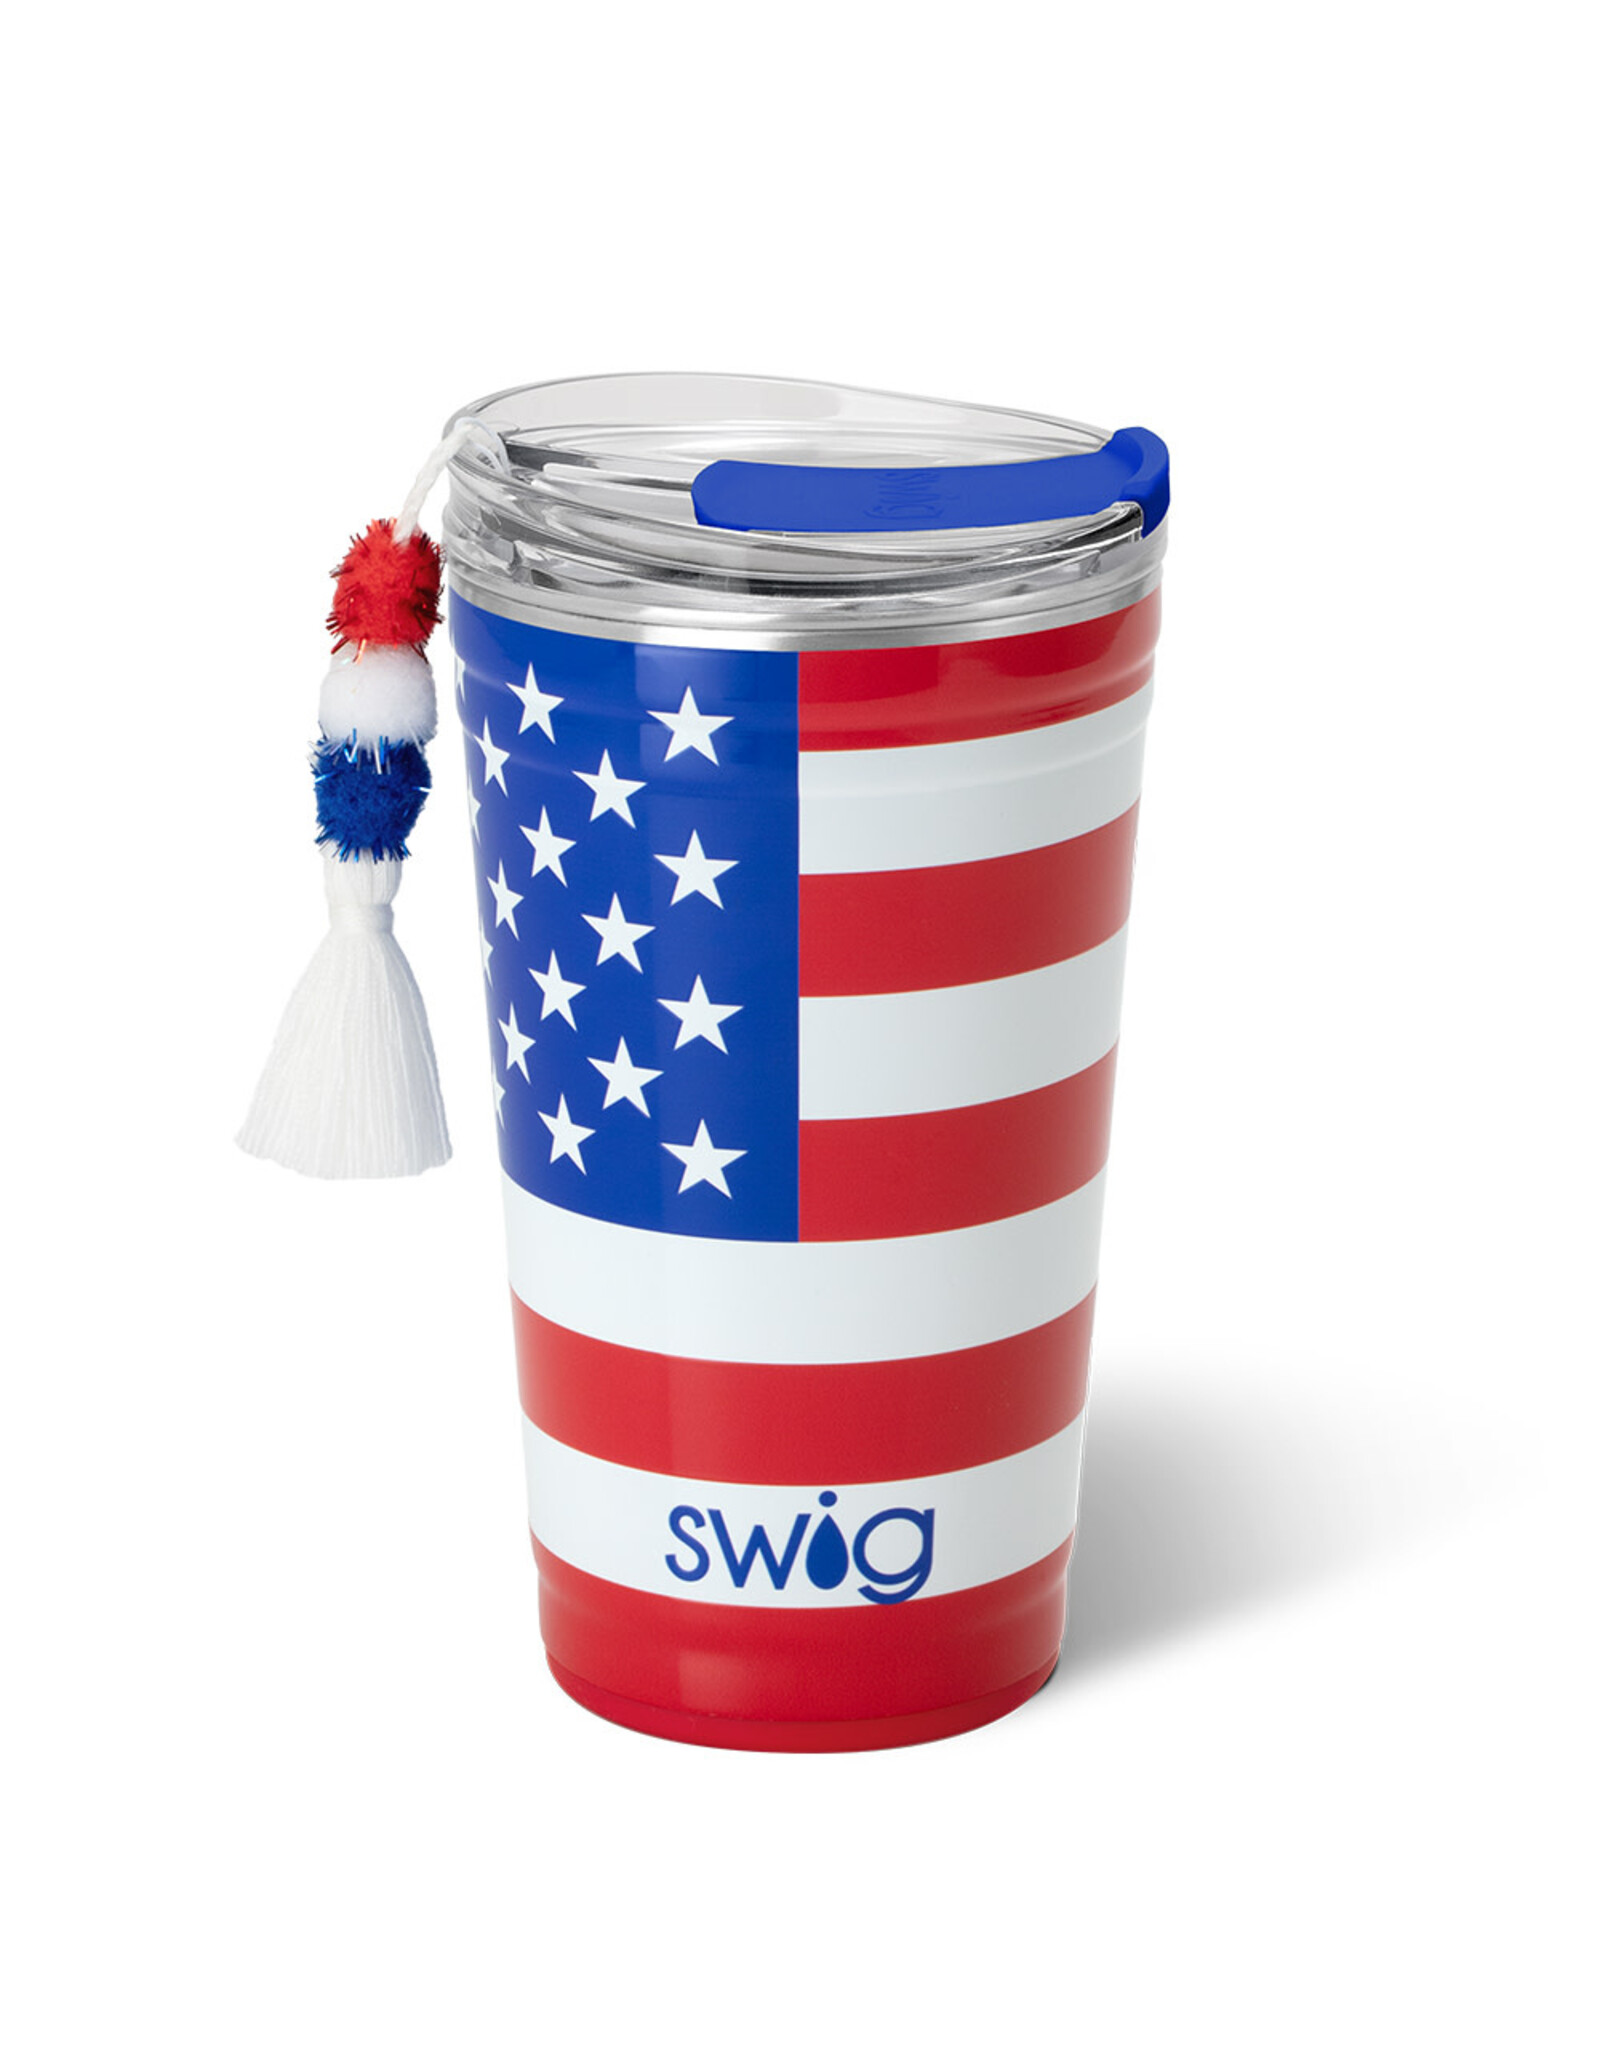 All American 24 oz party cup